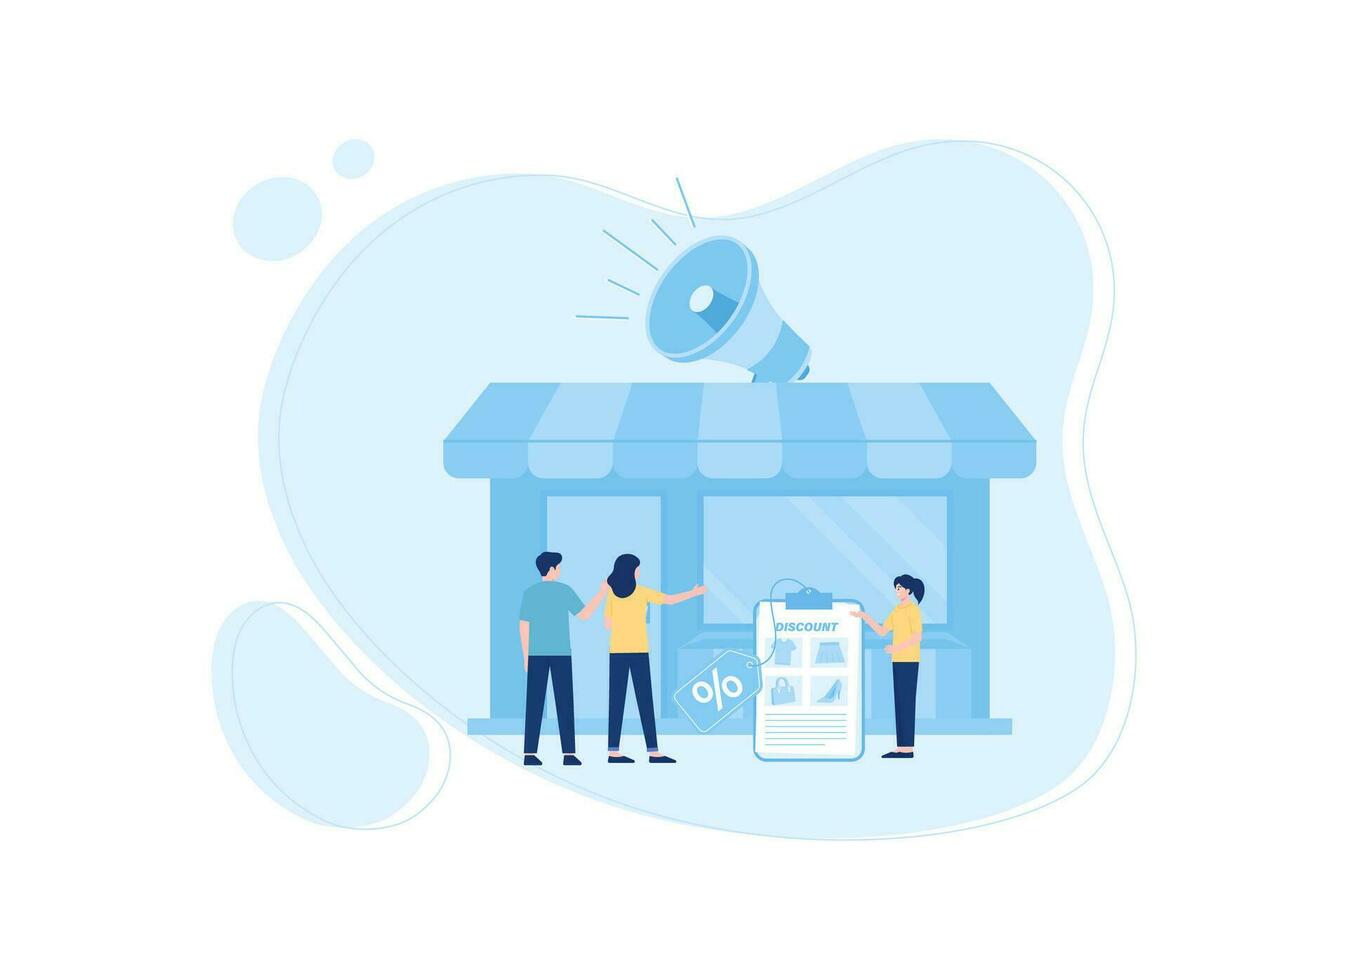 Stand booth concept flat illustration vector